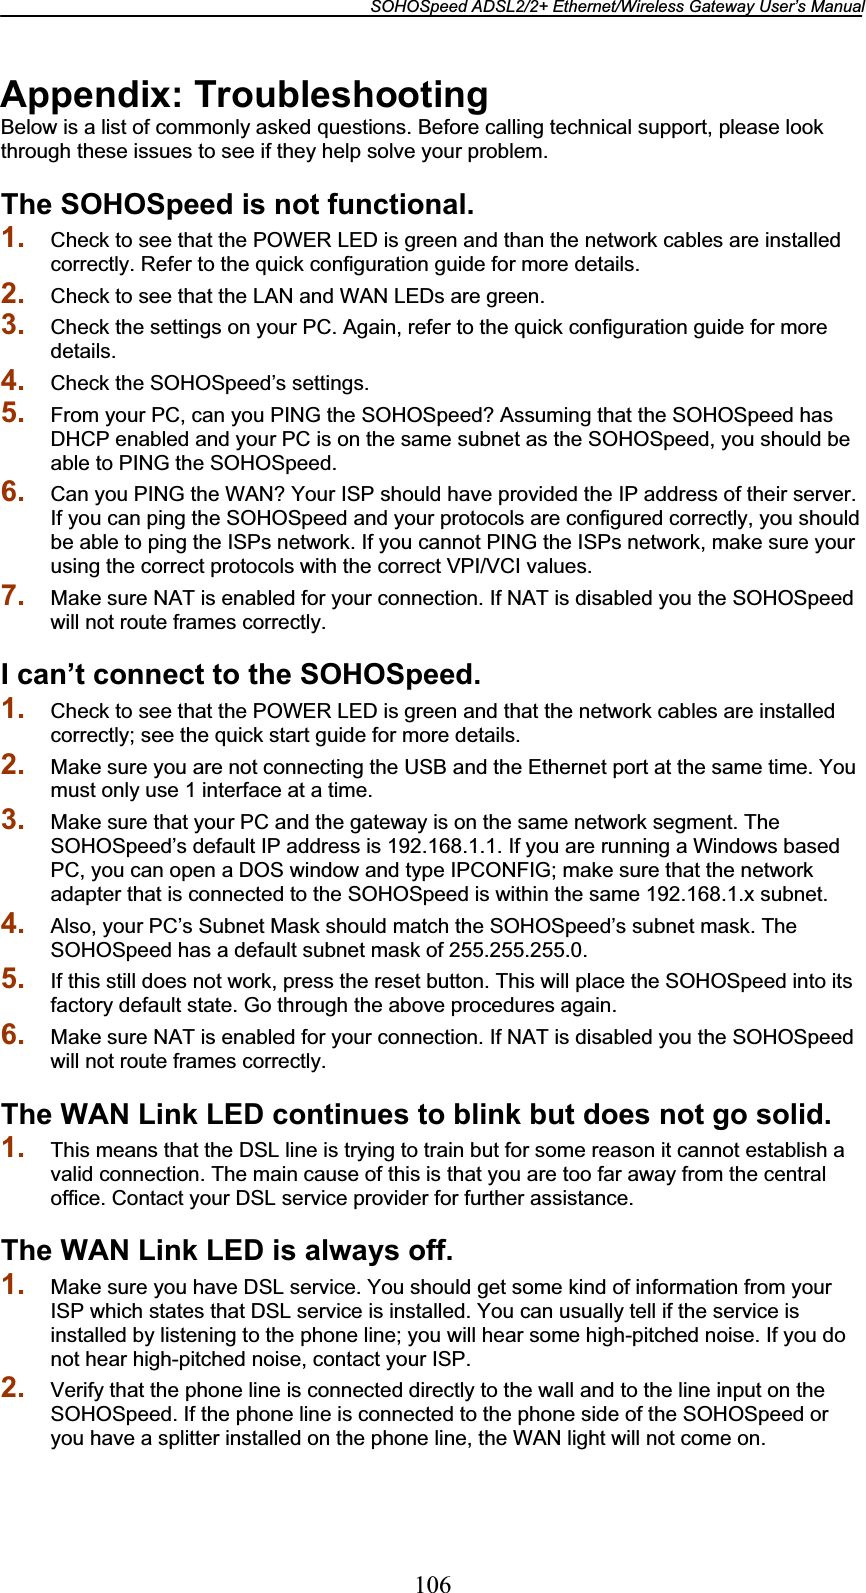 SOHOSpeed ADSL2/2+ Ethernet/Wireless Gateway User’s Manual 106Appendix: Troubleshooting Below is a list of commonly asked questions. Before calling technical support, please look through these issues to see if they help solve your problem. The SOHOSpeed is not functional. 1. Check to see that the POWER LED is green and than the network cables are installed correctly. Refer to the quick configuration guide for more details. 2. Check to see that the LAN and WAN LEDs are green. 3. Check the settings on your PC. Again, refer to the quick configuration guide for more details.4. Check the SOHOSpeed’s settings. 5. From your PC, can you PING the SOHOSpeed? Assuming that the SOHOSpeed has DHCP enabled and your PC is on the same subnet as the SOHOSpeed, you should be able to PING the SOHOSpeed. 6. Can you PING the WAN? Your ISP should have provided the IP address of their server. If you can ping the SOHOSpeed and your protocols are configured correctly, you should be able to ping the ISPs network. If you cannot PING the ISPs network, make sure your using the correct protocols with the correct VPI/VCI values. 7. Make sure NAT is enabled for your connection. If NAT is disabled you the SOHOSpeed will not route frames correctly. I can’t connect to the SOHOSpeed. 1. Check to see that the POWER LED is green and that the network cables are installed correctly; see the quick start guide for more details. 2. Make sure you are not connecting the USB and the Ethernet port at the same time. You must only use 1 interface at a time. 3. Make sure that your PC and the gateway is on the same network segment. The SOHOSpeed’s default IP address is 192.168.1.1. If you are running a Windows based PC, you can open a DOS window and type IPCONFIG; make sure that the network adapter that is connected to the SOHOSpeed is within the same 192.168.1.x subnet. 4. Also, your PC’s Subnet Mask should match the SOHOSpeed’s subnet mask. The SOHOSpeed has a default subnet mask of 255.255.255.0. 5. If this still does not work, press the reset button. This will place the SOHOSpeed into its factory default state. Go through the above procedures again. 6. Make sure NAT is enabled for your connection. If NAT is disabled you the SOHOSpeed will not route frames correctly. The WAN Link LED continues to blink but does not go solid. 1. This means that the DSL line is trying to train but for some reason it cannot establish a valid connection. The main cause of this is that you are too far away from the central office. Contact your DSL service provider for further assistance. The WAN Link LED is always off. 1. Make sure you have DSL service. You should get some kind of information from your ISP which states that DSL service is installed. You can usually tell if the service is installed by listening to the phone line; you will hear some high-pitched noise. If you do not hear high-pitched noise, contact your ISP. 2. Verify that the phone line is connected directly to the wall and to the line input on the SOHOSpeed. If the phone line is connected to the phone side of the SOHOSpeed or you have a splitter installed on the phone line, the WAN light will not come on. 